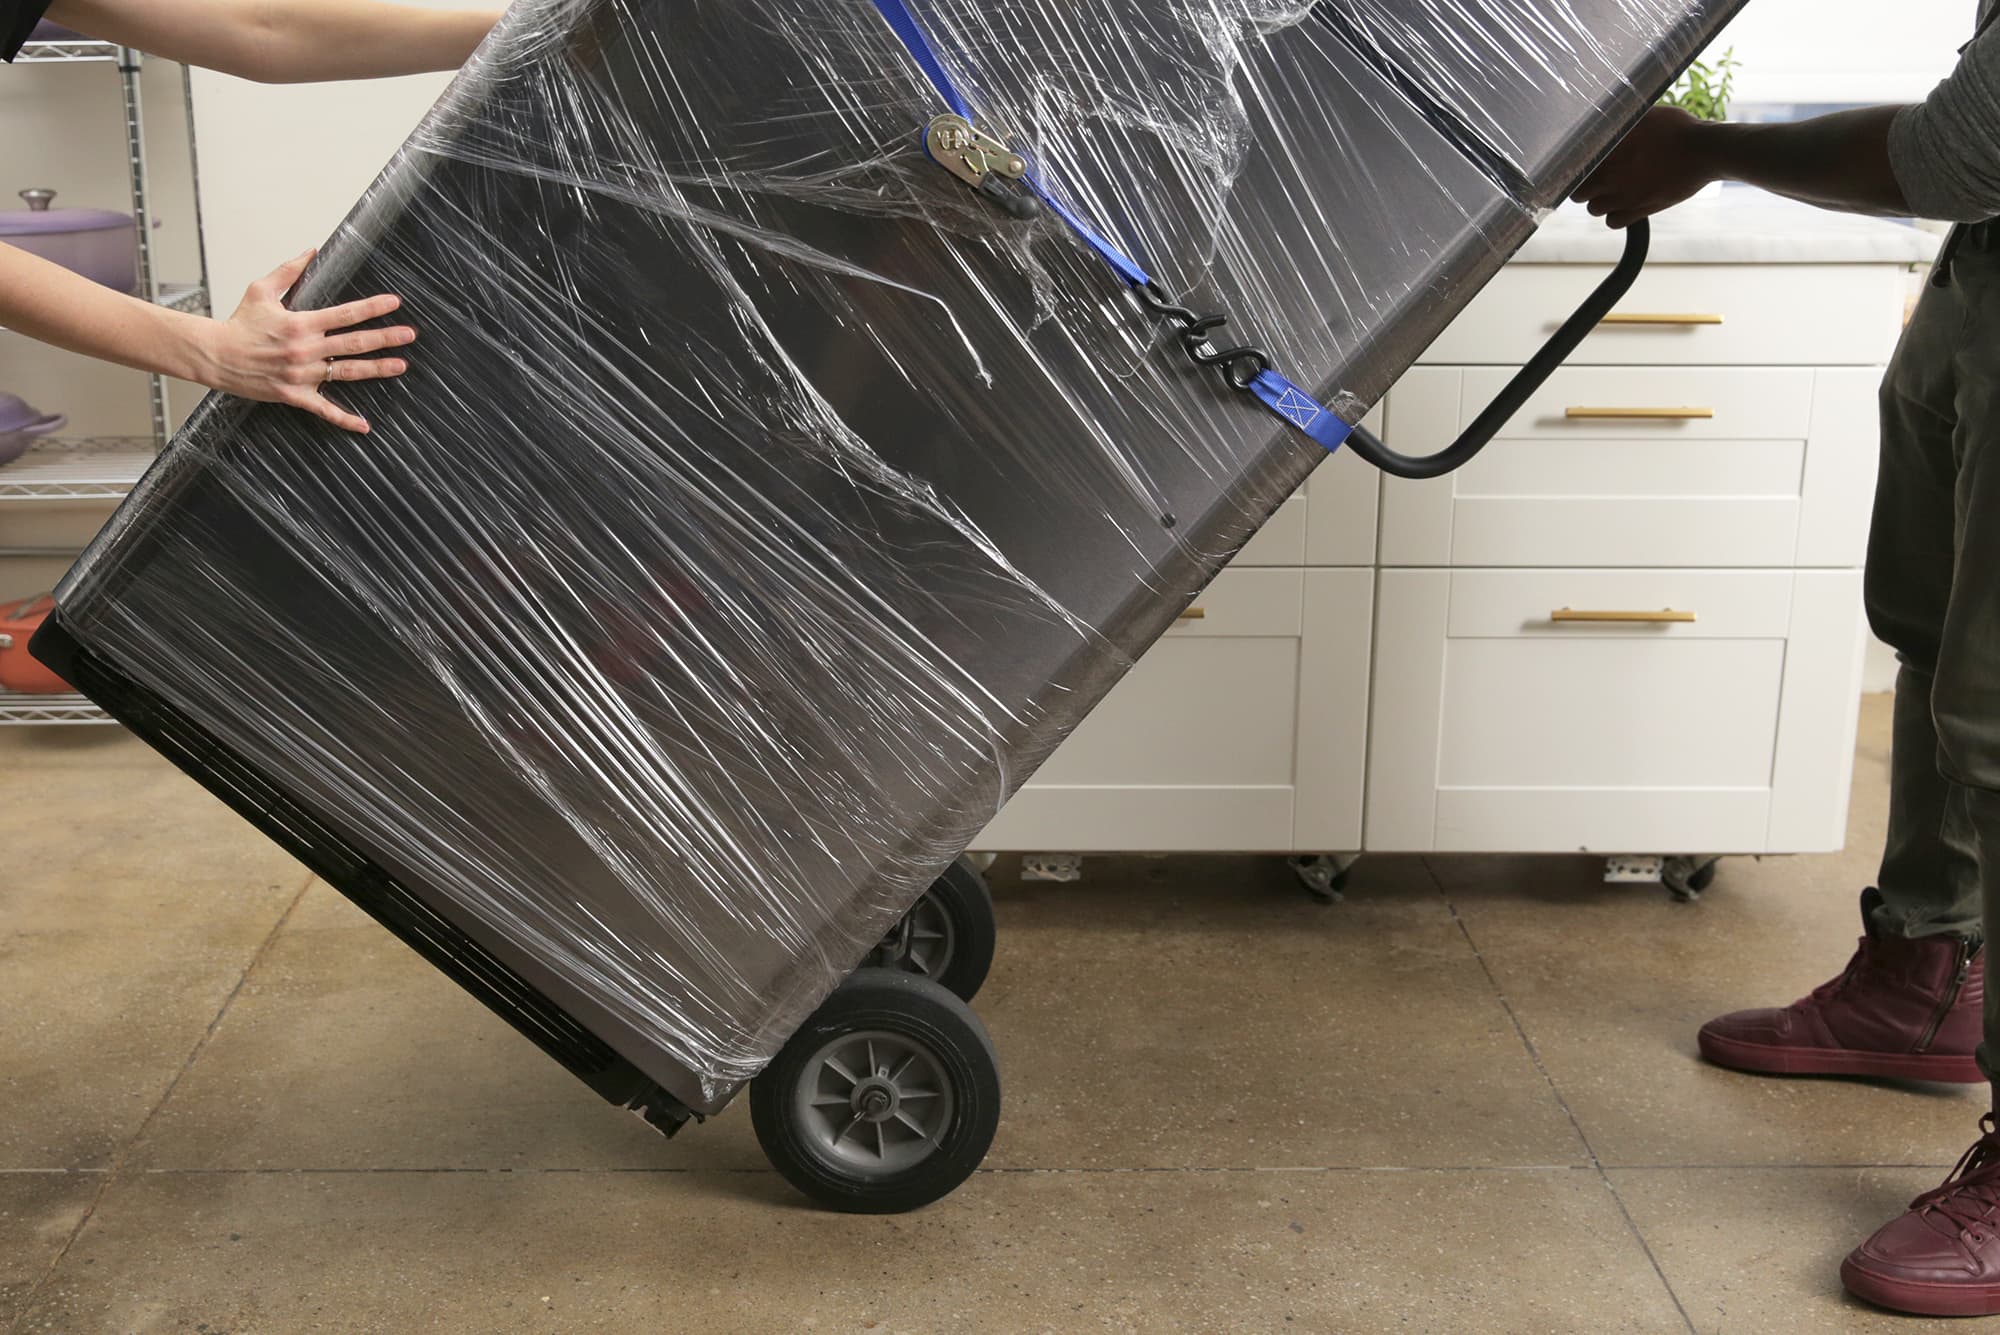 How to Move a Refrigerator Safely, According to Pro Movers